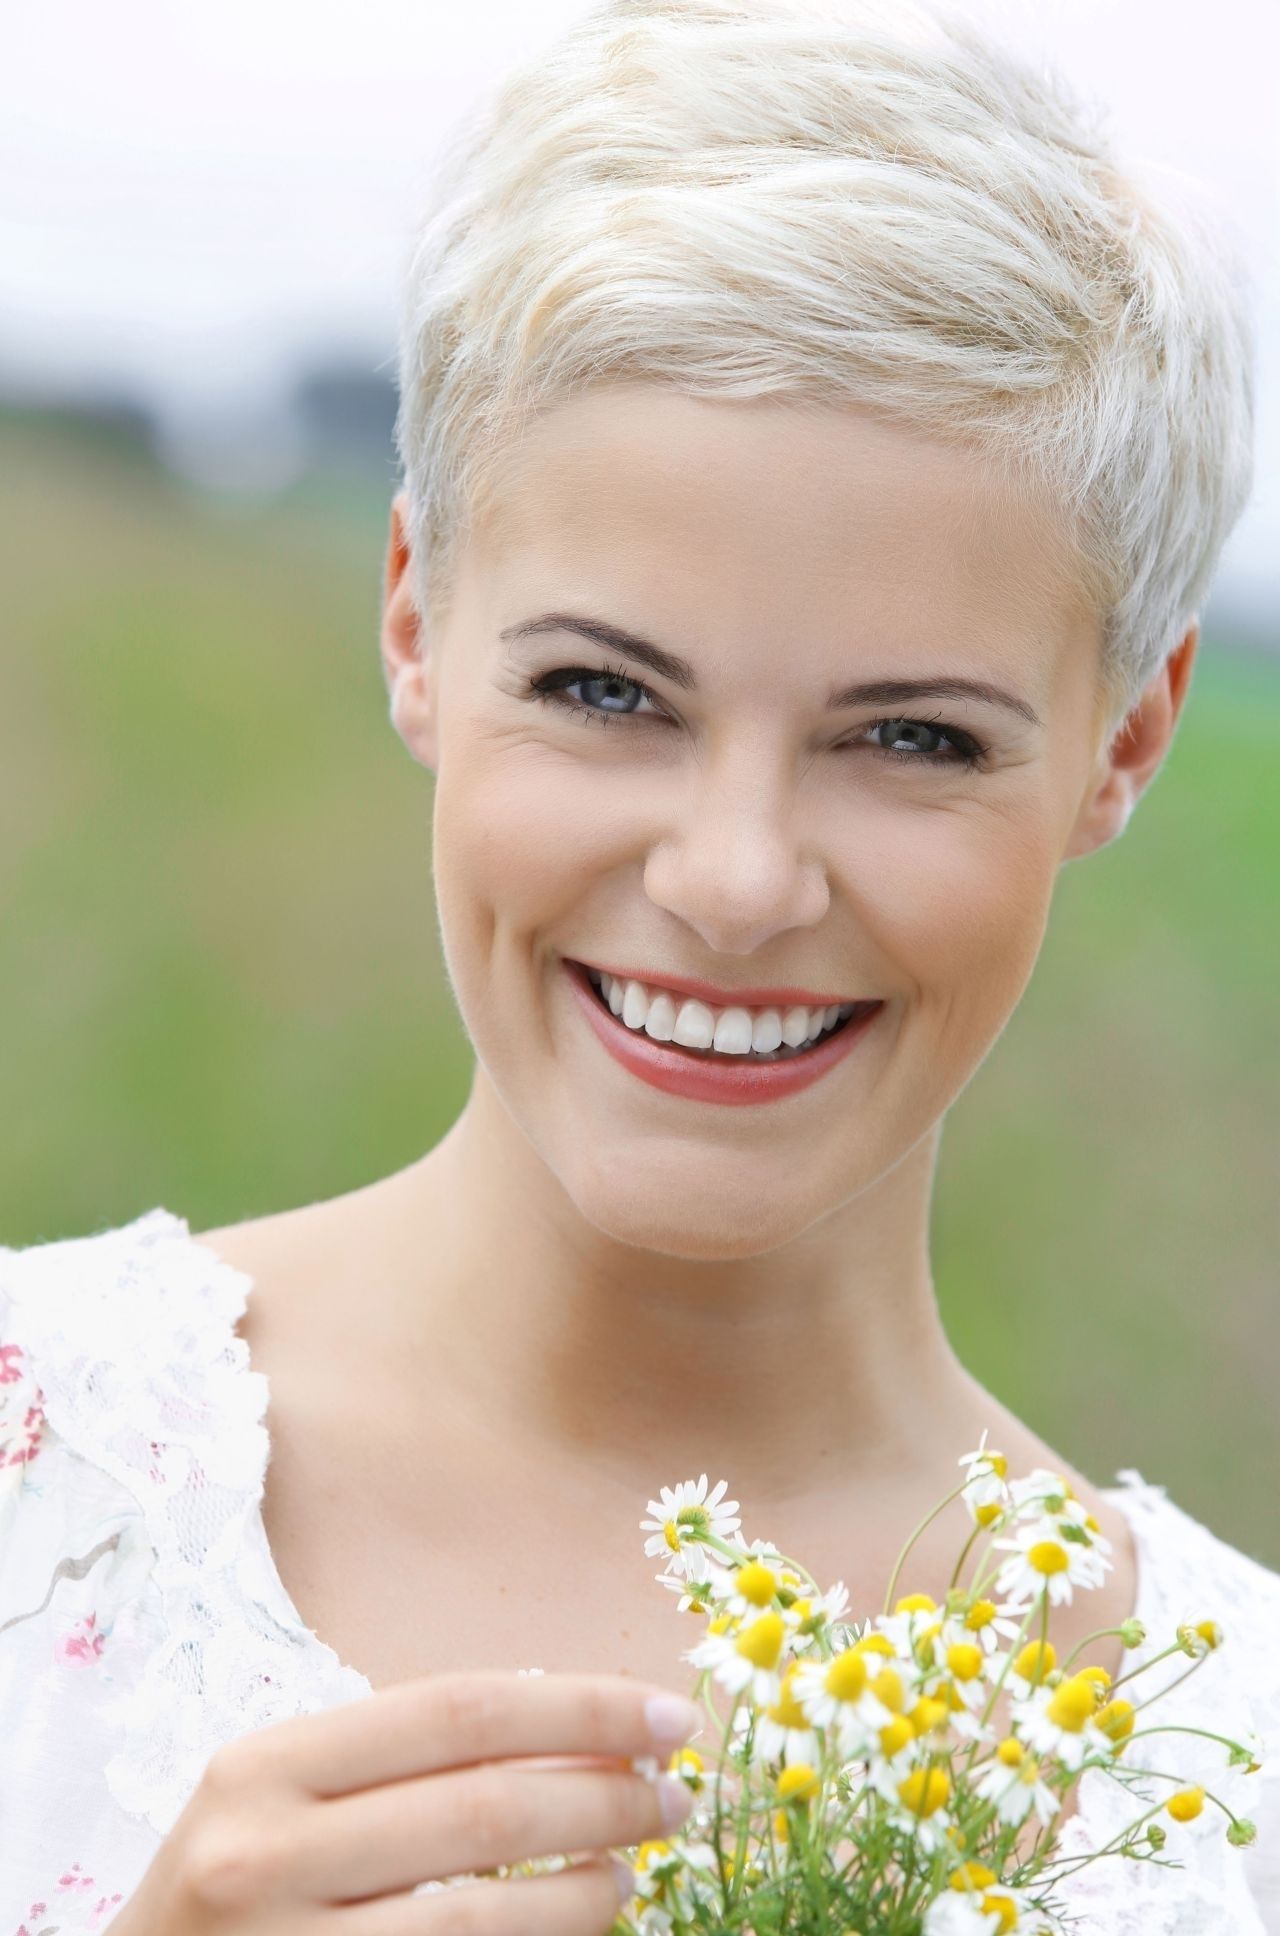 Short Pixie Haircut New Short Blonde Hairstyles Short Hairstyles Most With Regard To Current Very Short Pixie Hairstyles For Women (Photo 7 of 15)